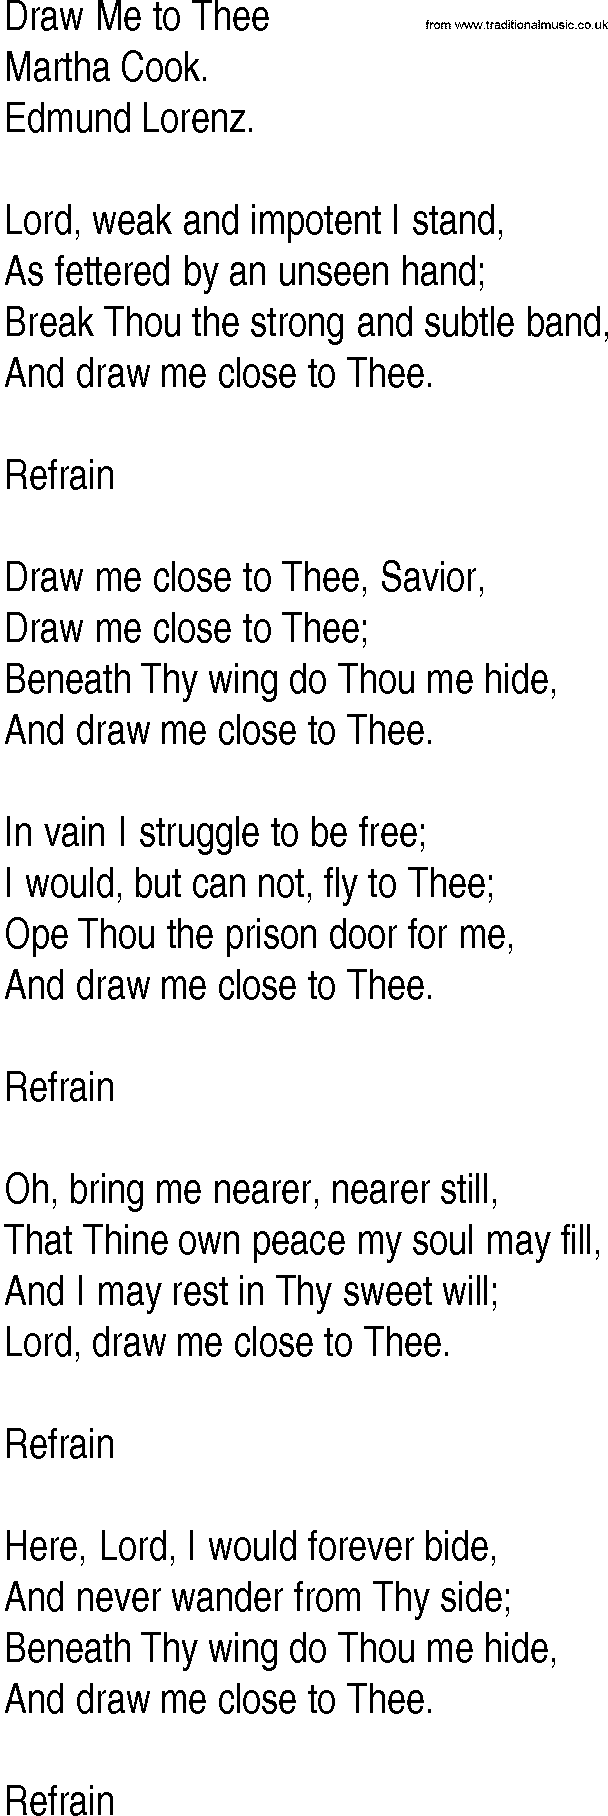 Hymn and Gospel Song: Draw Me to Thee by Martha Cook lyrics